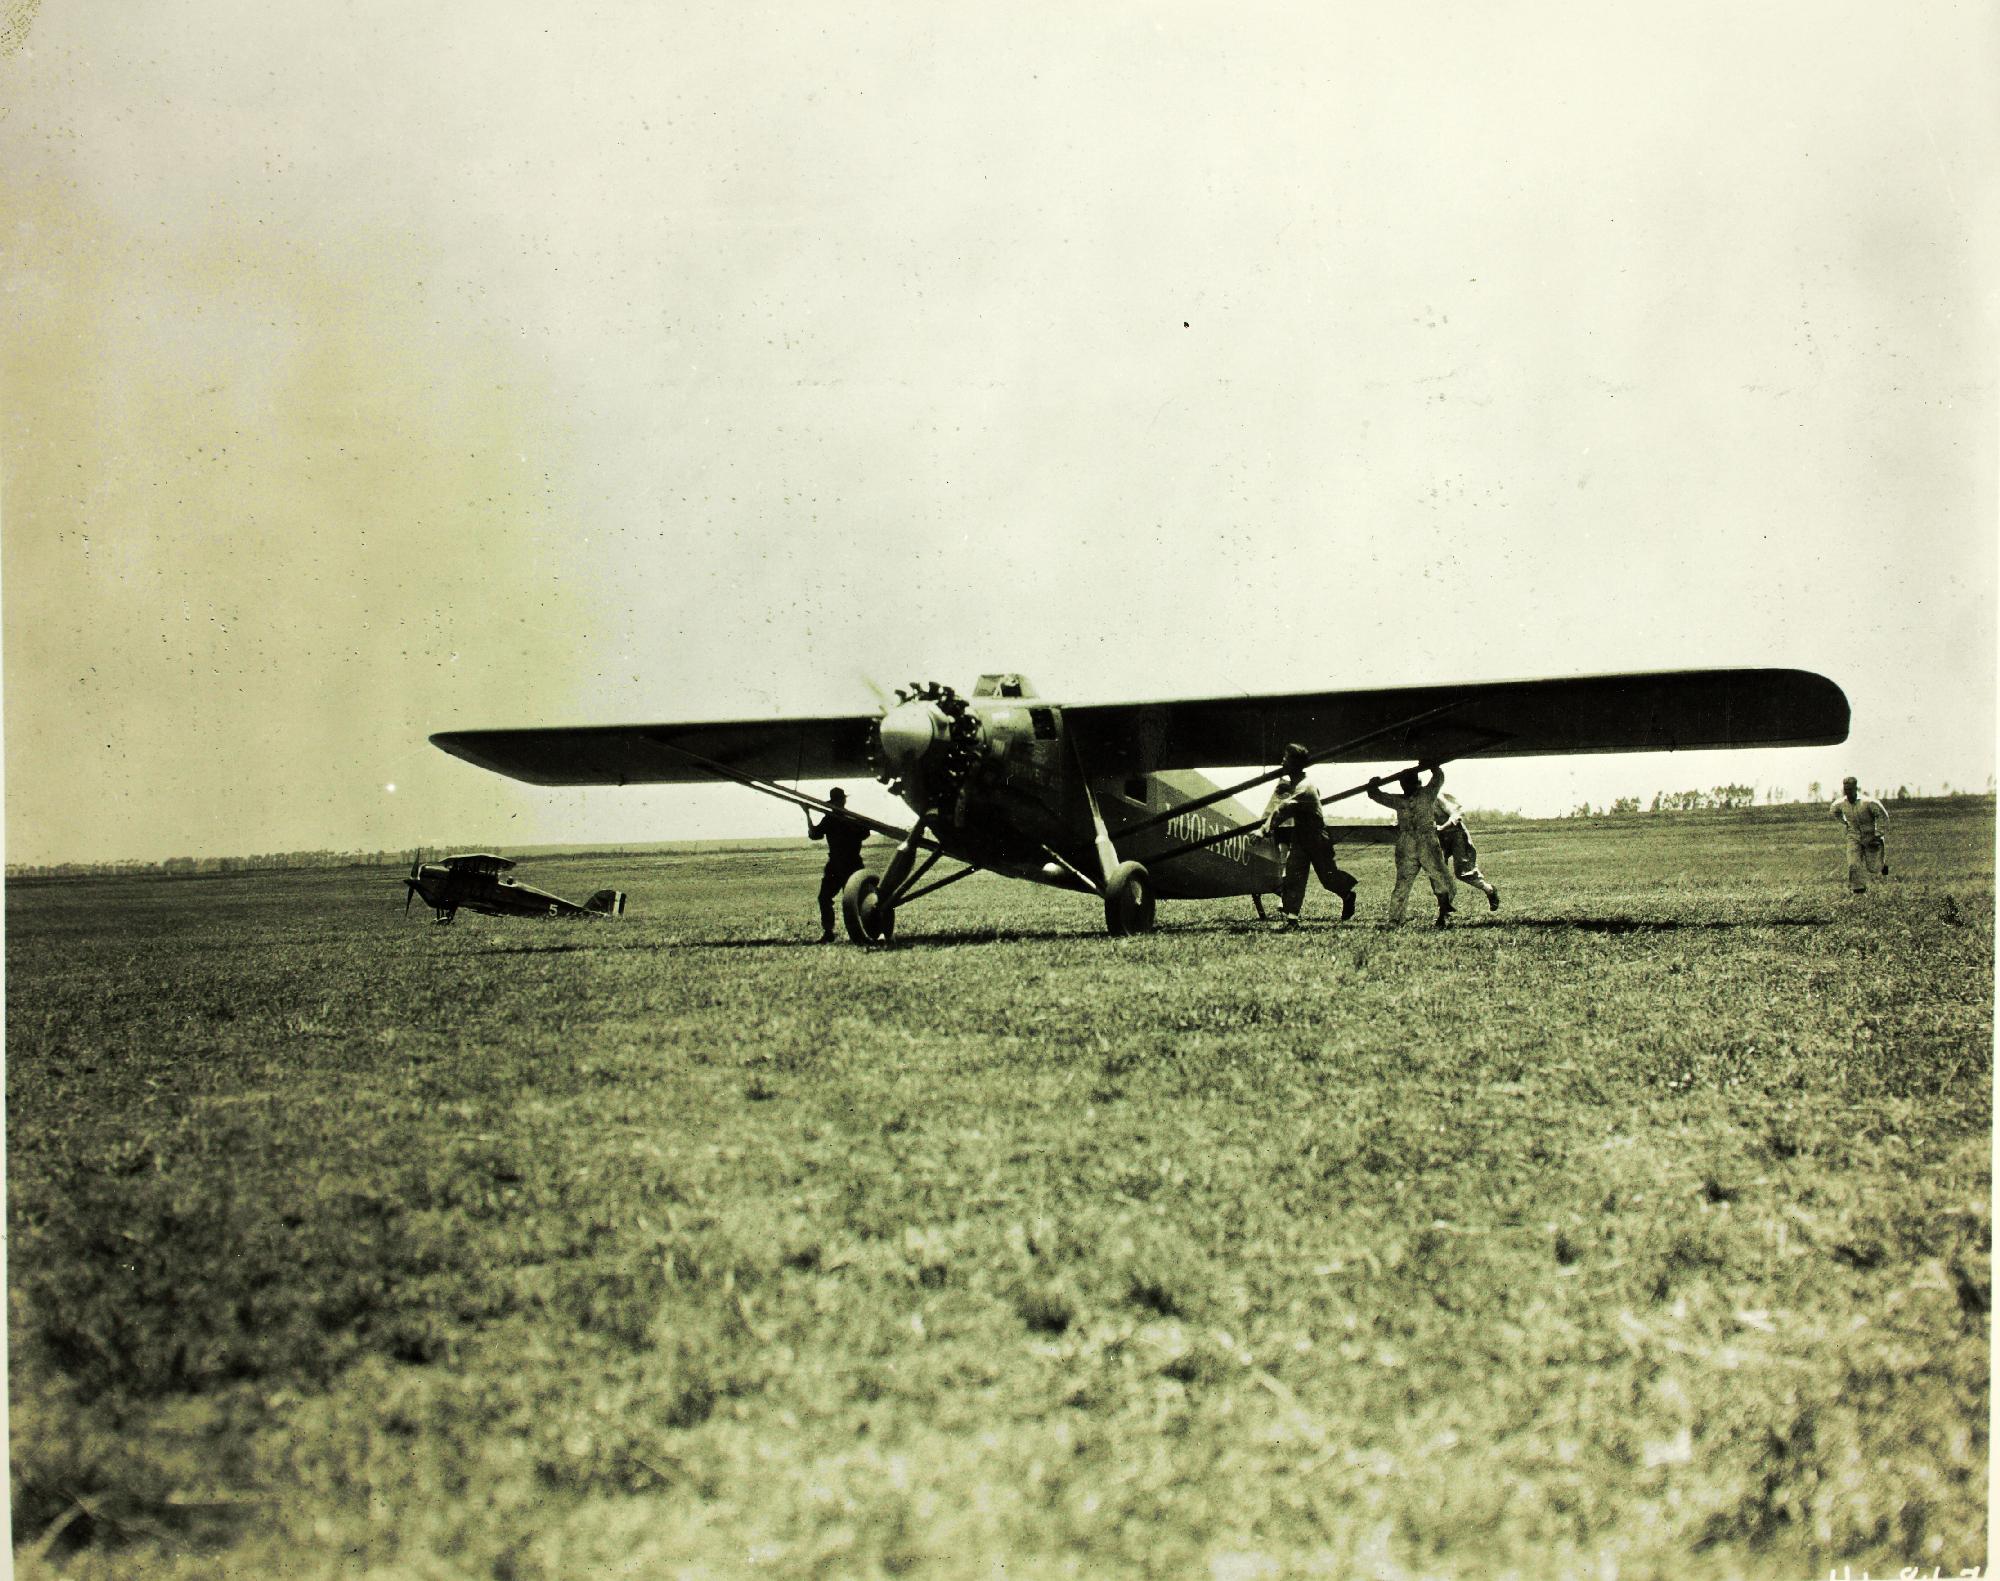 Woolaroc, the Travel Air 500, NX869, arrives at Wheeler Field, Honolulu, Territory of Hawaii, 17 August 1927. (San Diego Air and Space Museum archives) 